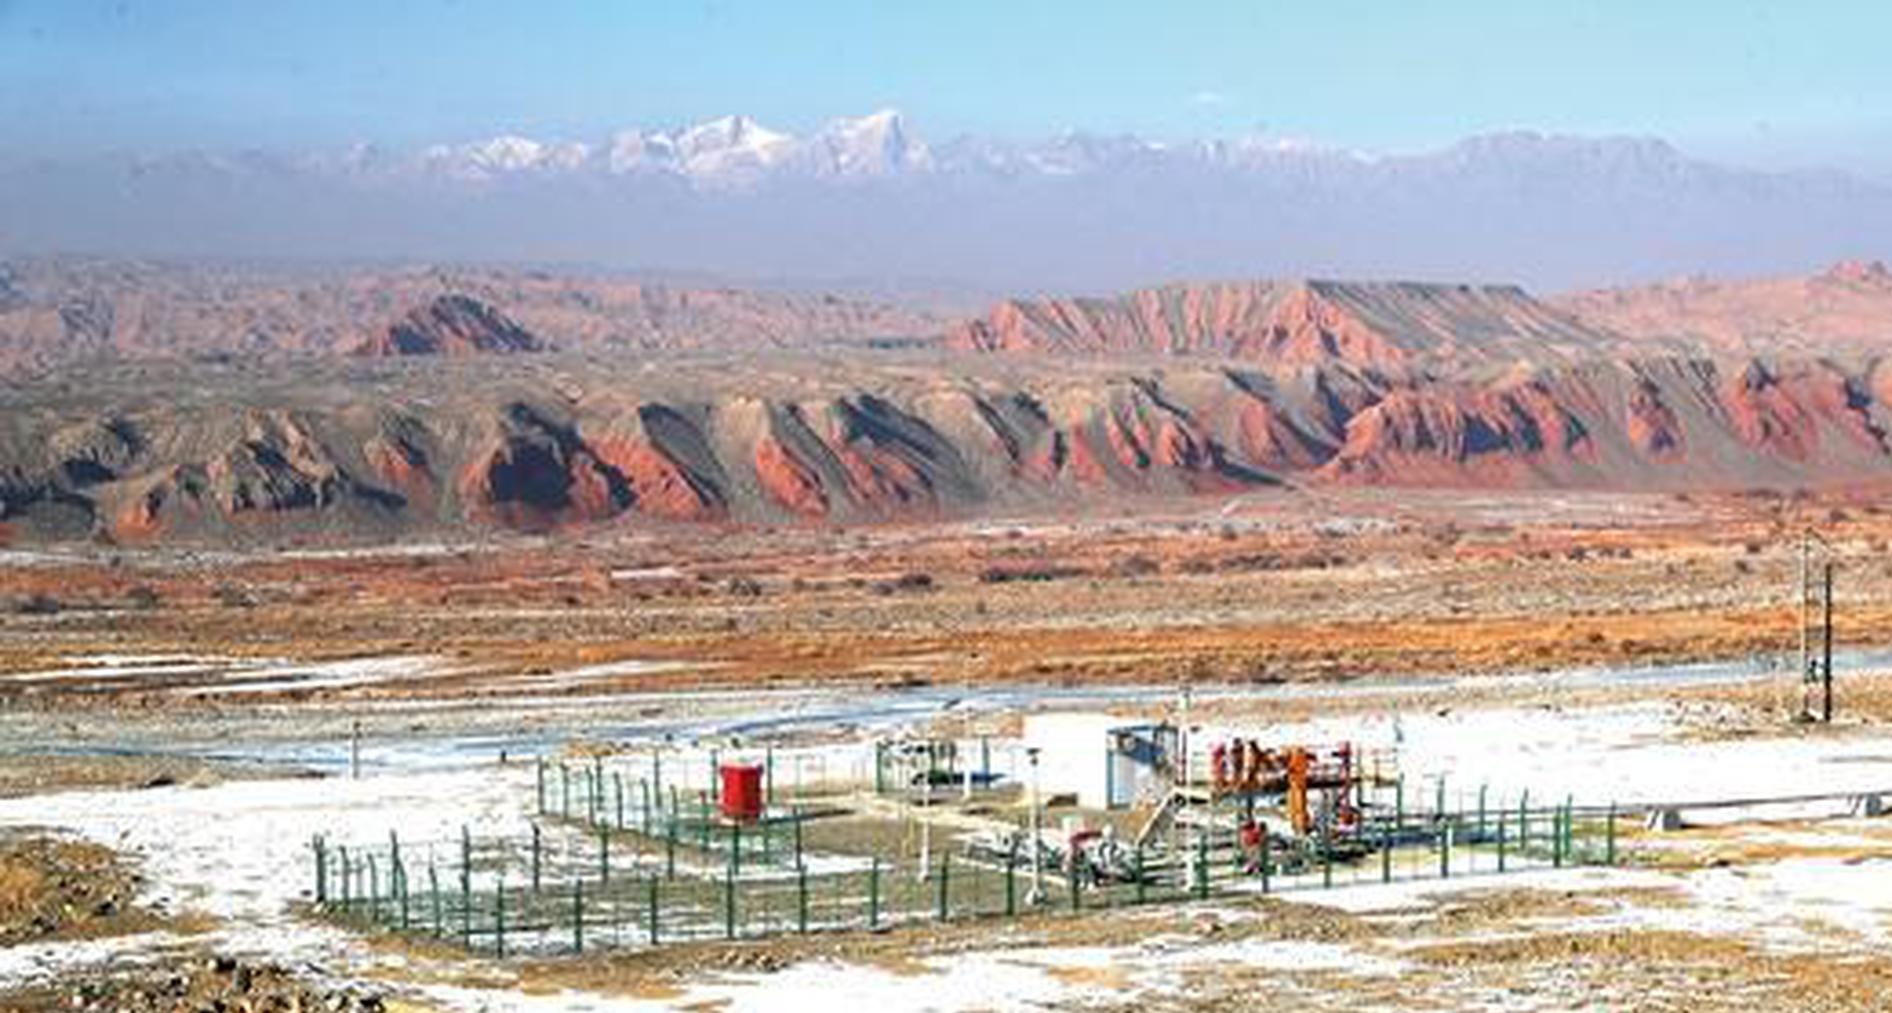 Natural gas output at Kela-Keshen gas field exceeds 200 bln cubic meters